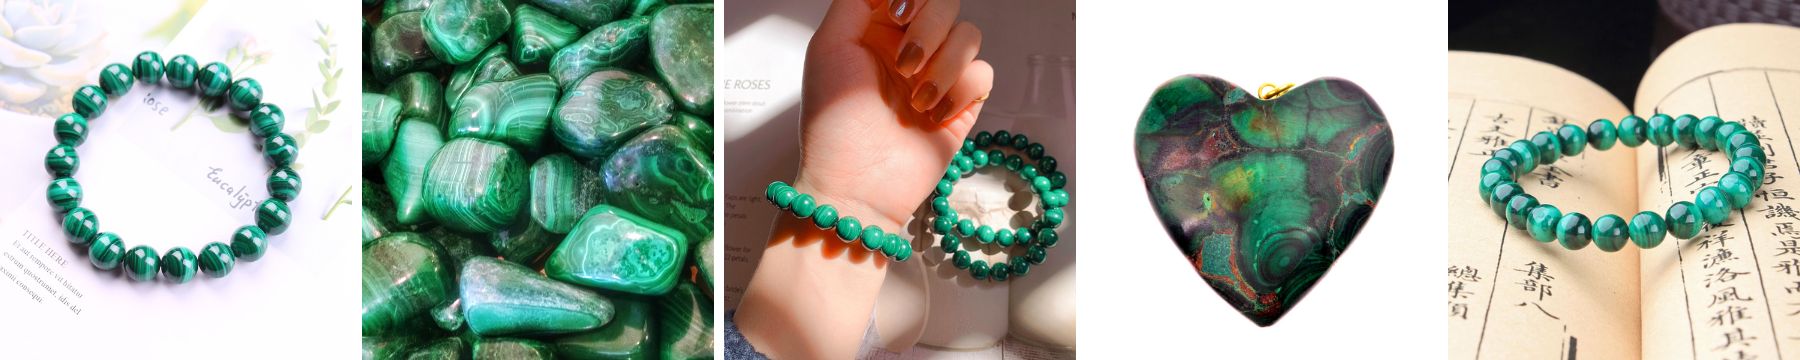 crystals for happiness - malachite